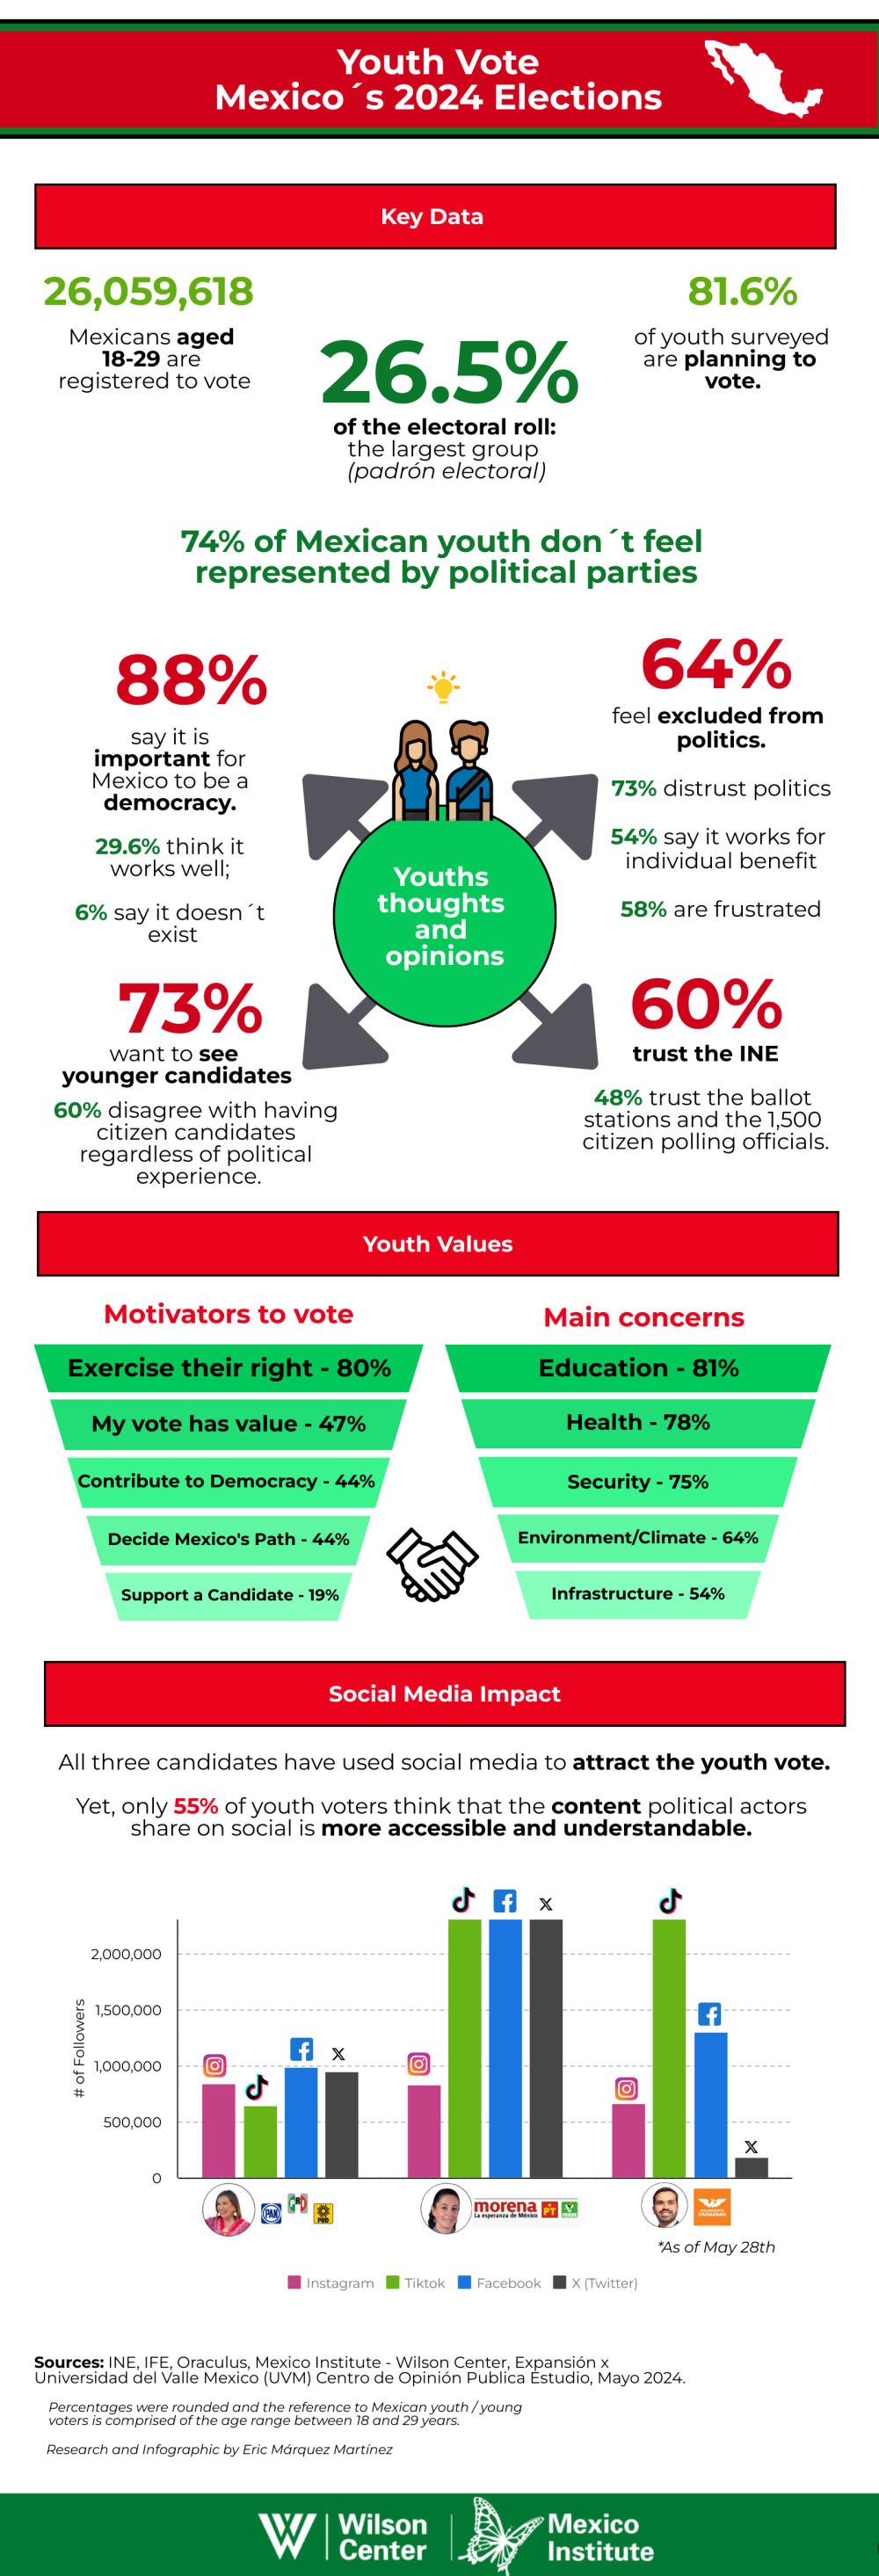 Mexico's Youth Vote Infographic